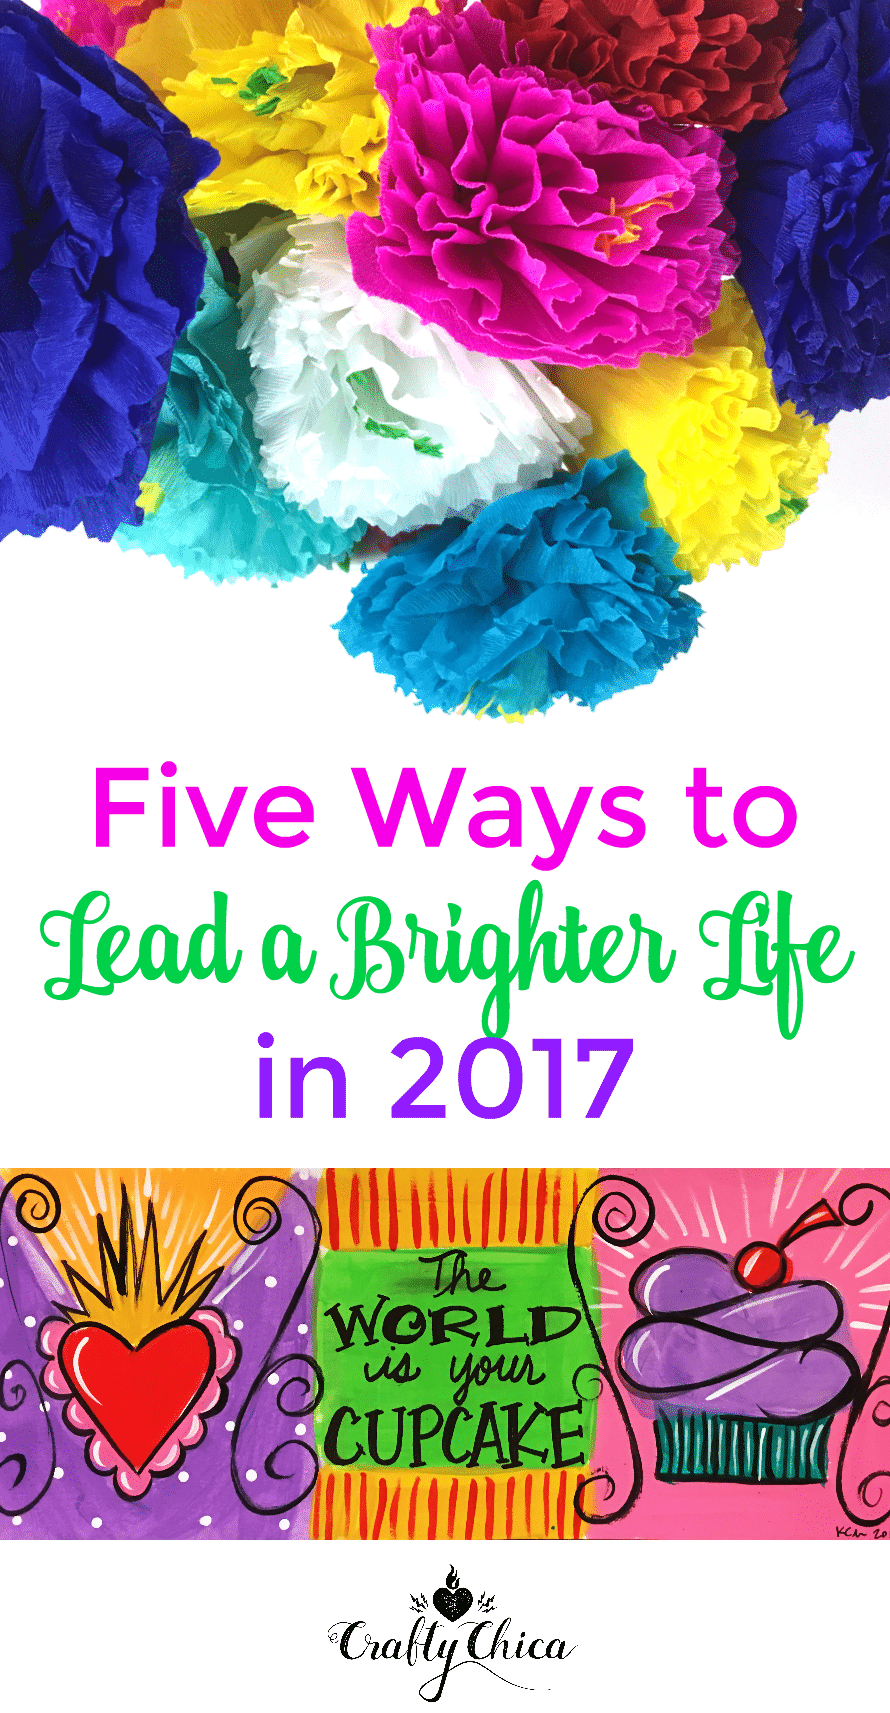 5 Ways to a Brighter life by Crafty Chica